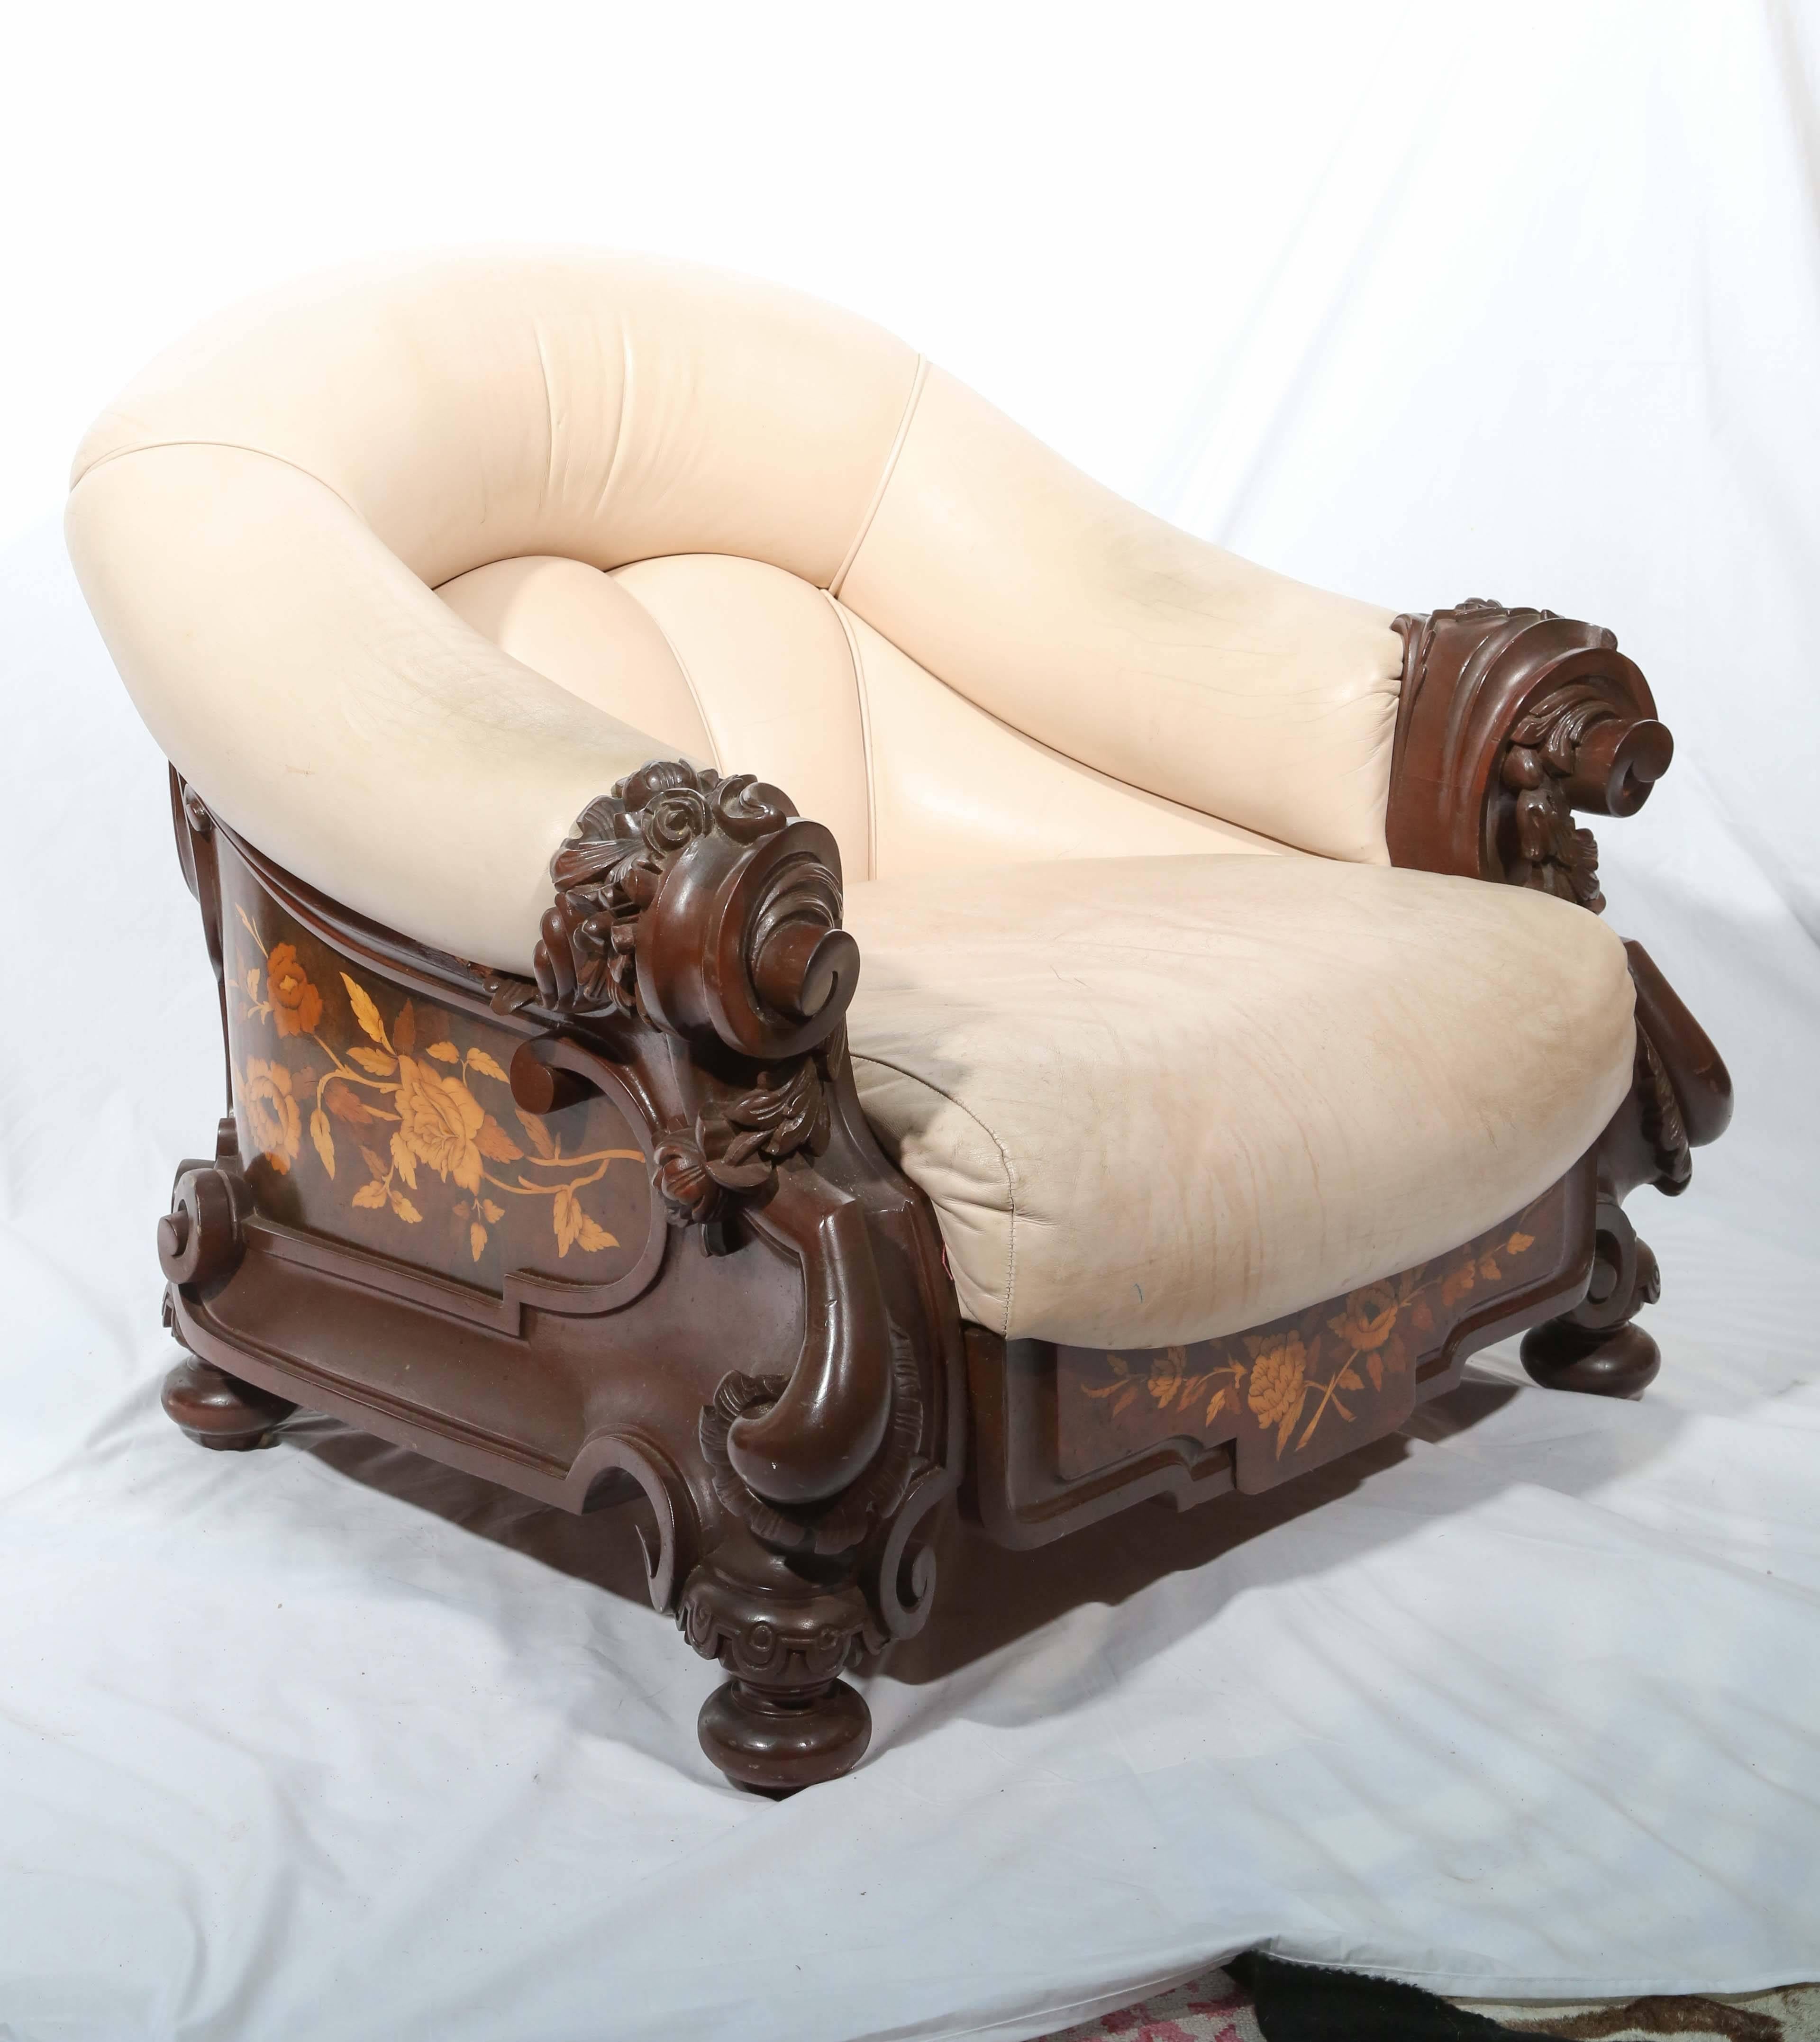 Exceptional in every detail, sumptuous leather, dramatic inlays and generous scale. Late 19th century Nouveau accent.